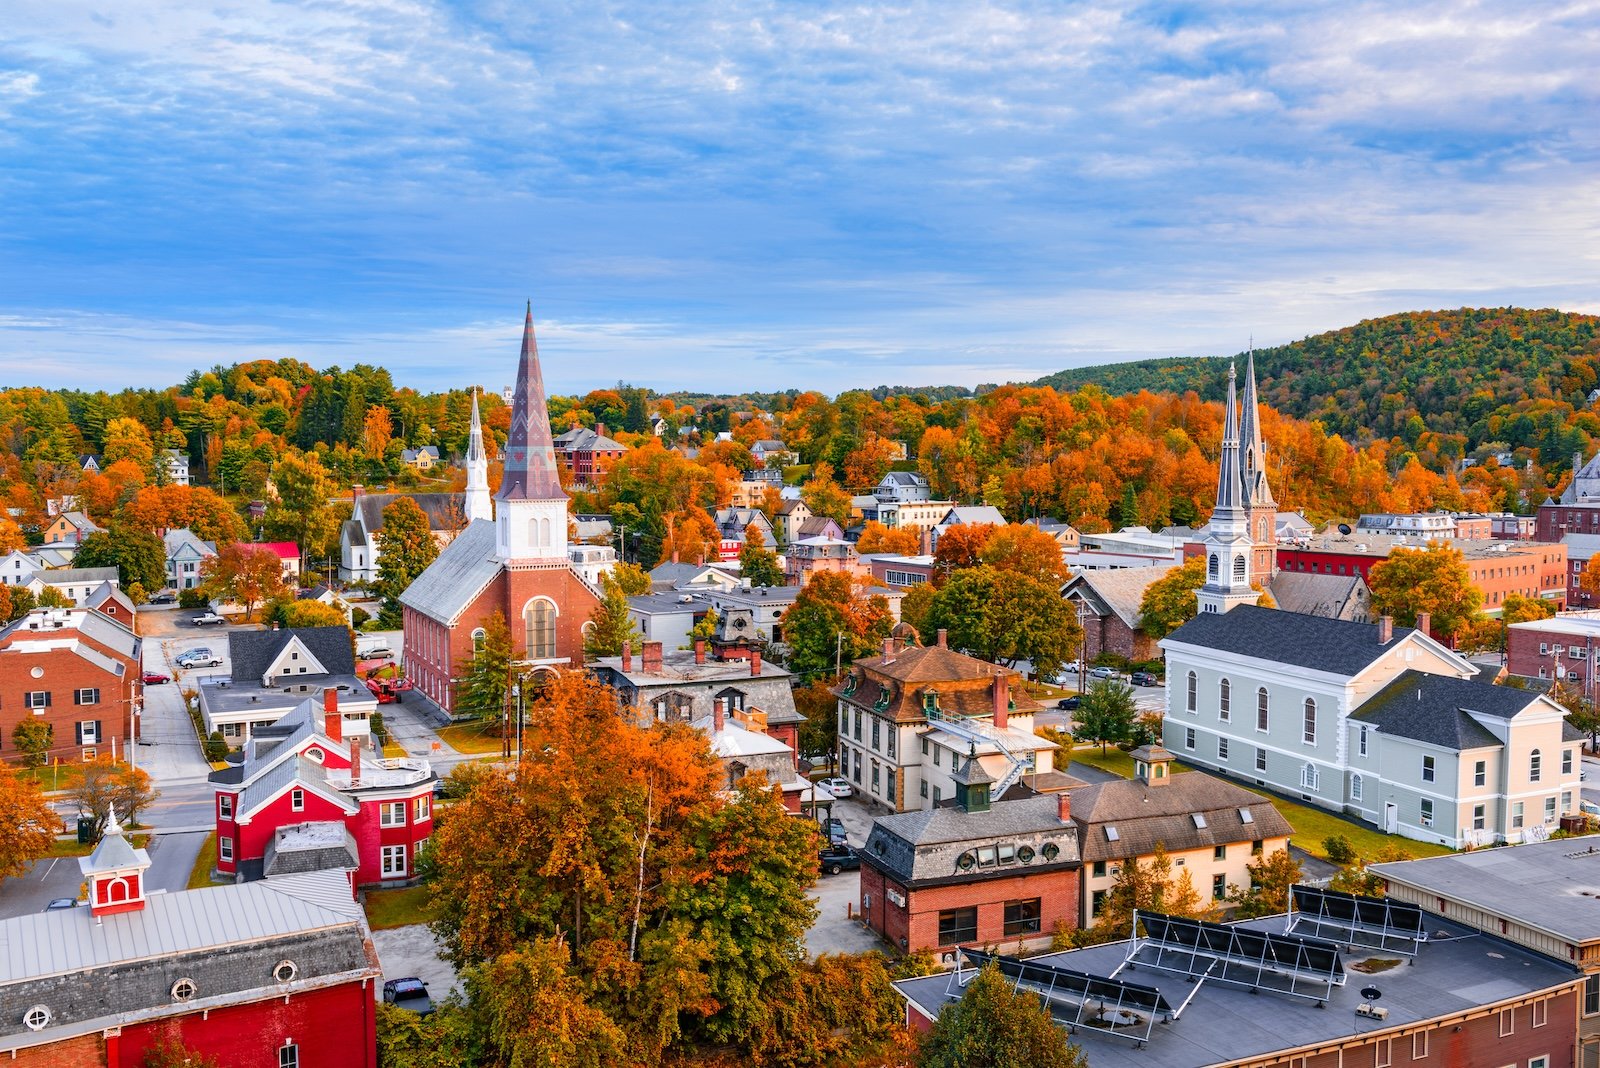 <p>Vermont residents experience considerable property tax burdens. With a median real estate tax payment of $4,706, homeowners contend with an effective tax rate of 1.89%.</p>